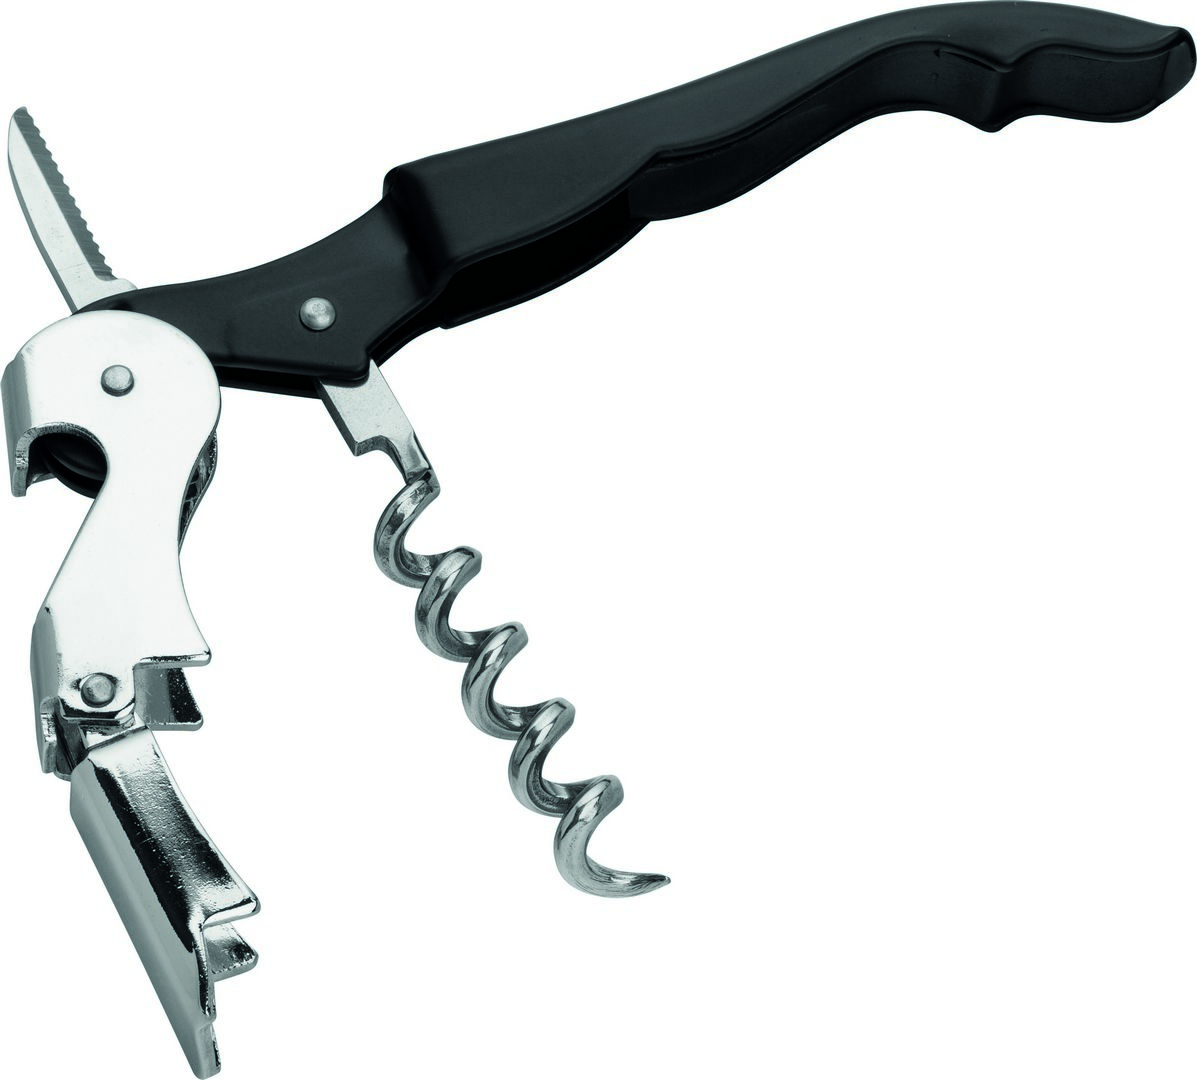 Double Reach Corkscrew - F93025-000000-B01012 (Pack of 12)